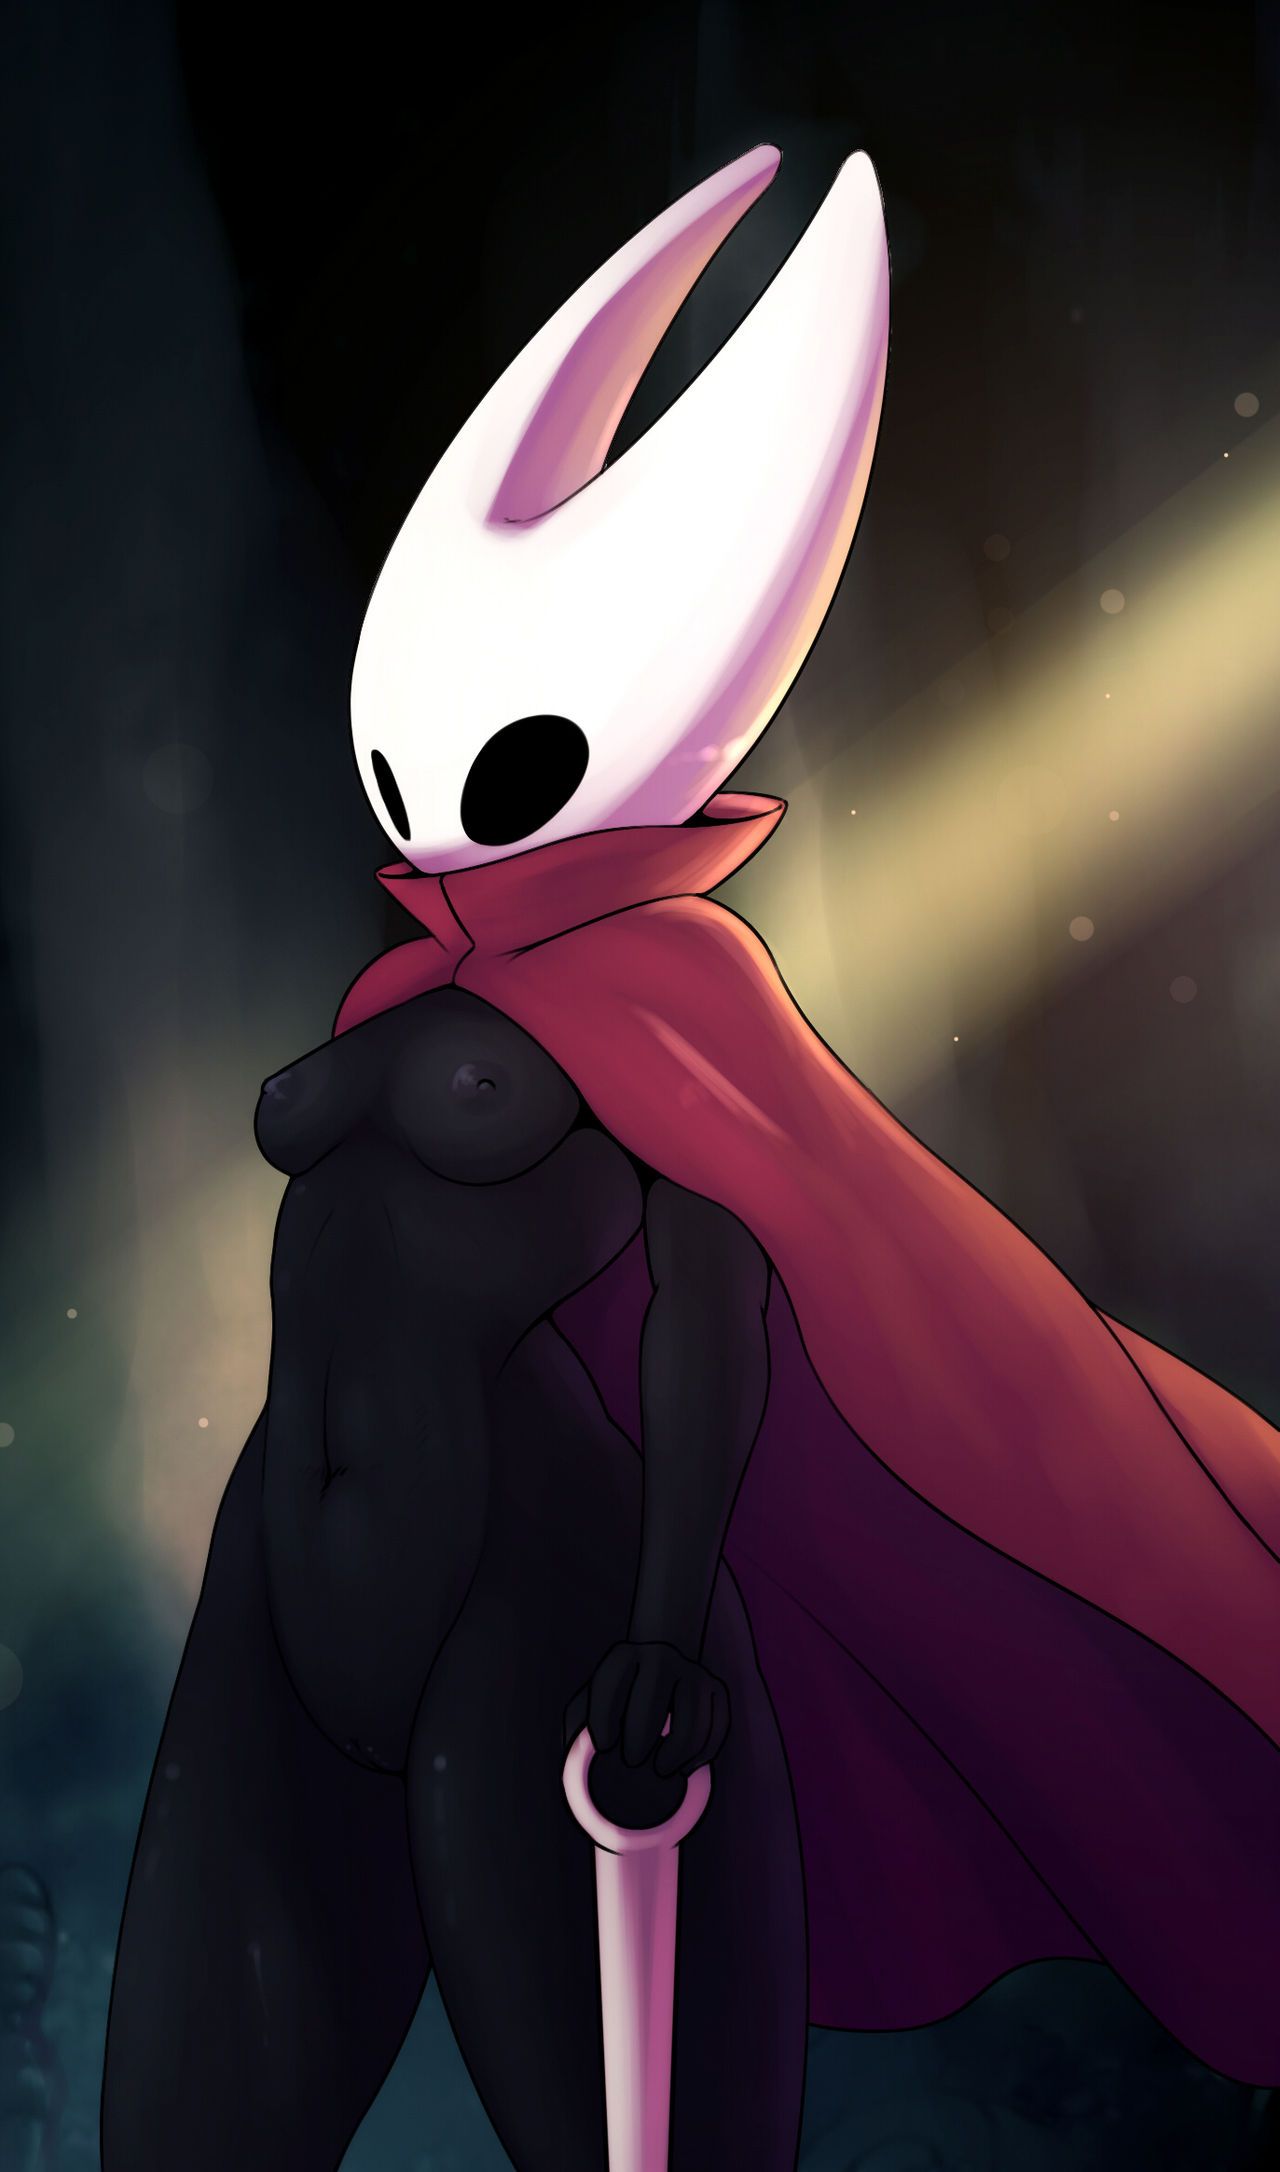 Hollow knight collection 7